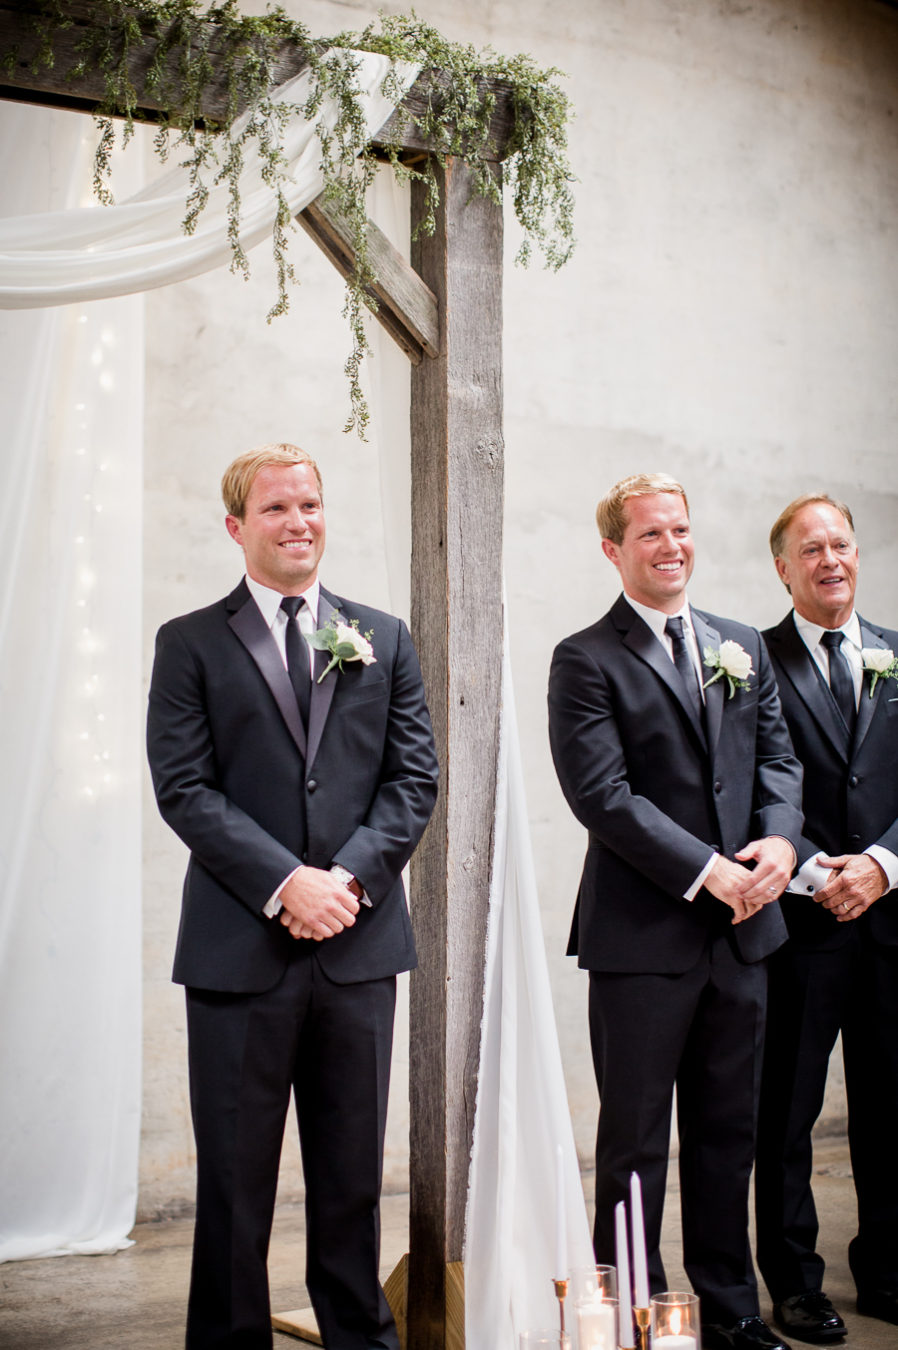 Groom waiting at the alter at this wedding at The Standard by Knoxville Wedding Photographer, Amanda May Photos.